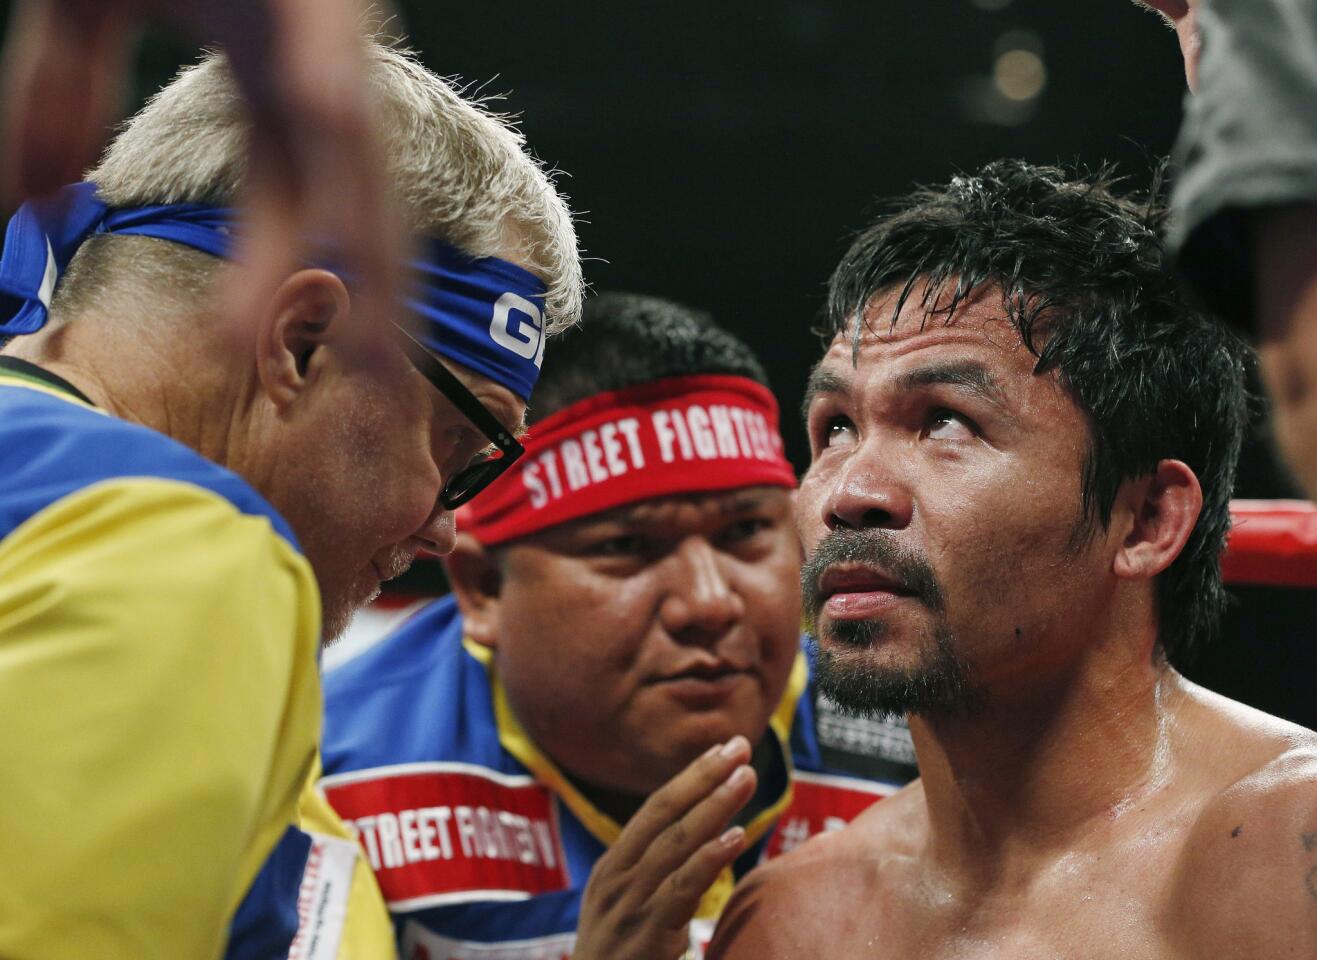 Manny Pacquiao in his corner.